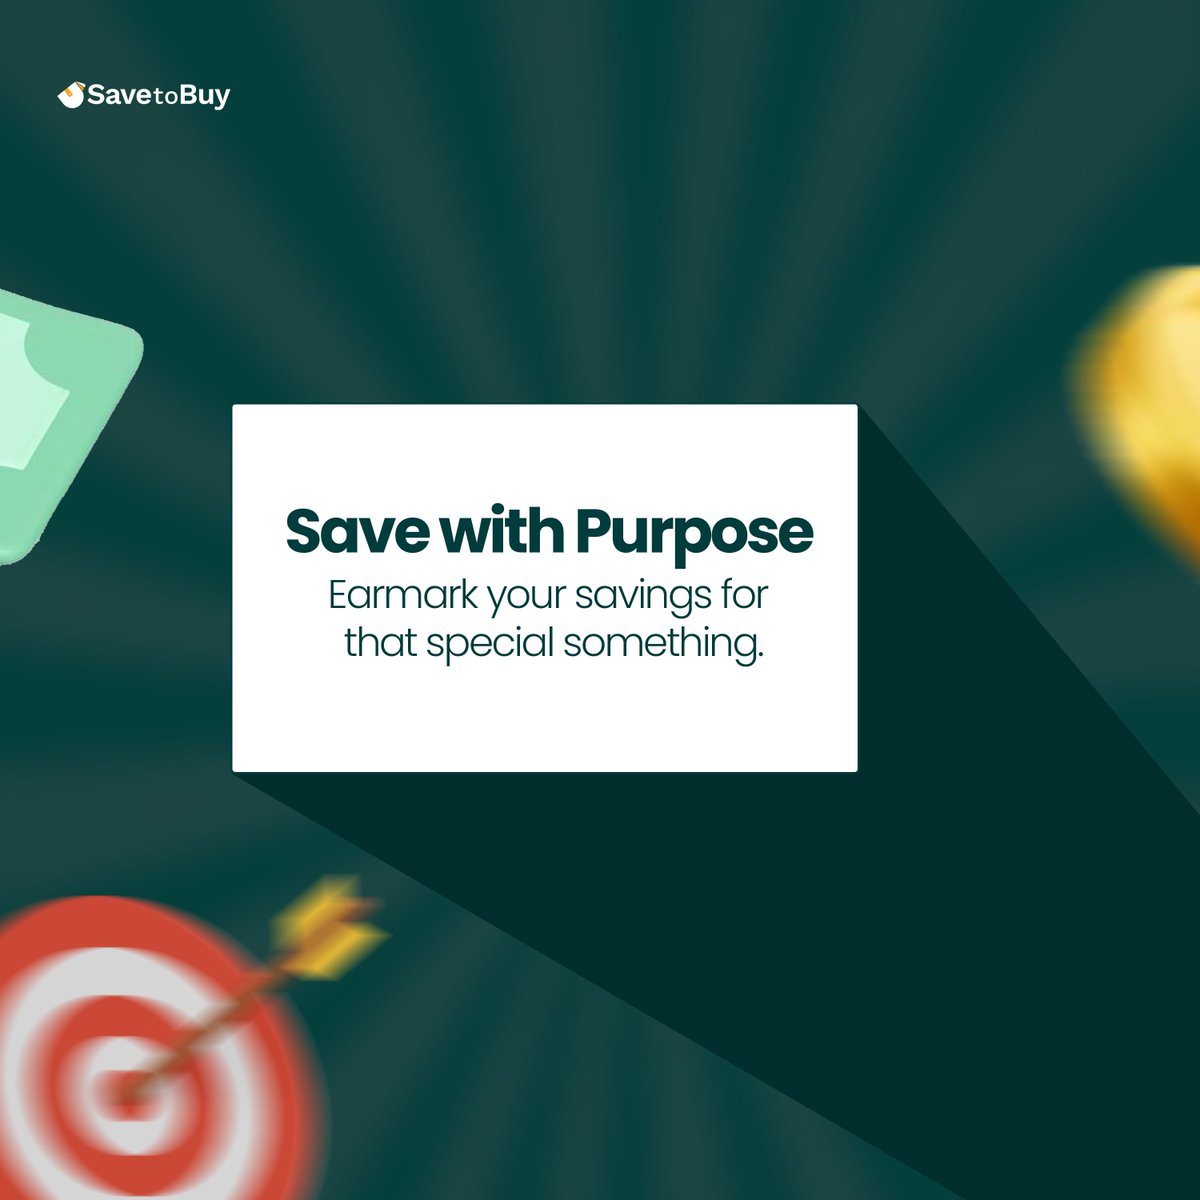 Don't forget that saving with a purpose would give you the motivation to keep going. We've got everything you need to get started on your path to financial security. Start your savings journey with us today. #savemoney #saveforthefuture #saveandinvest #smartsaving